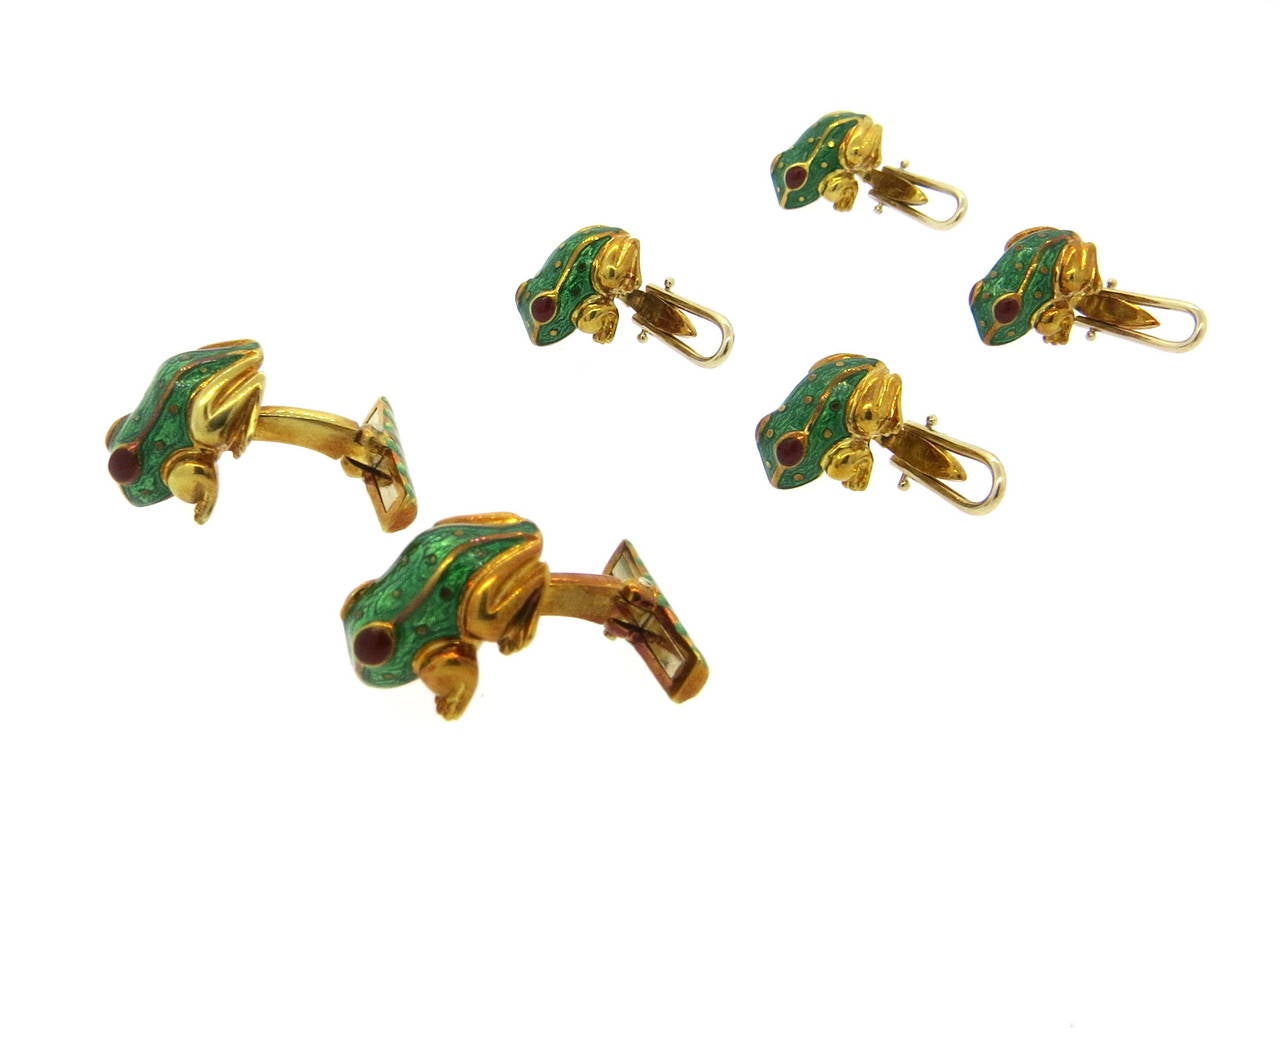 18k gold classic David Webb cufflinks and studs set, featuring frogs , decorated with green enamel and ruby eyes. Cufflinks measure 17mm x 15mm, studs - 15mm x 13mm. Marked 18k and Webb. Weight of the set - 36 grams